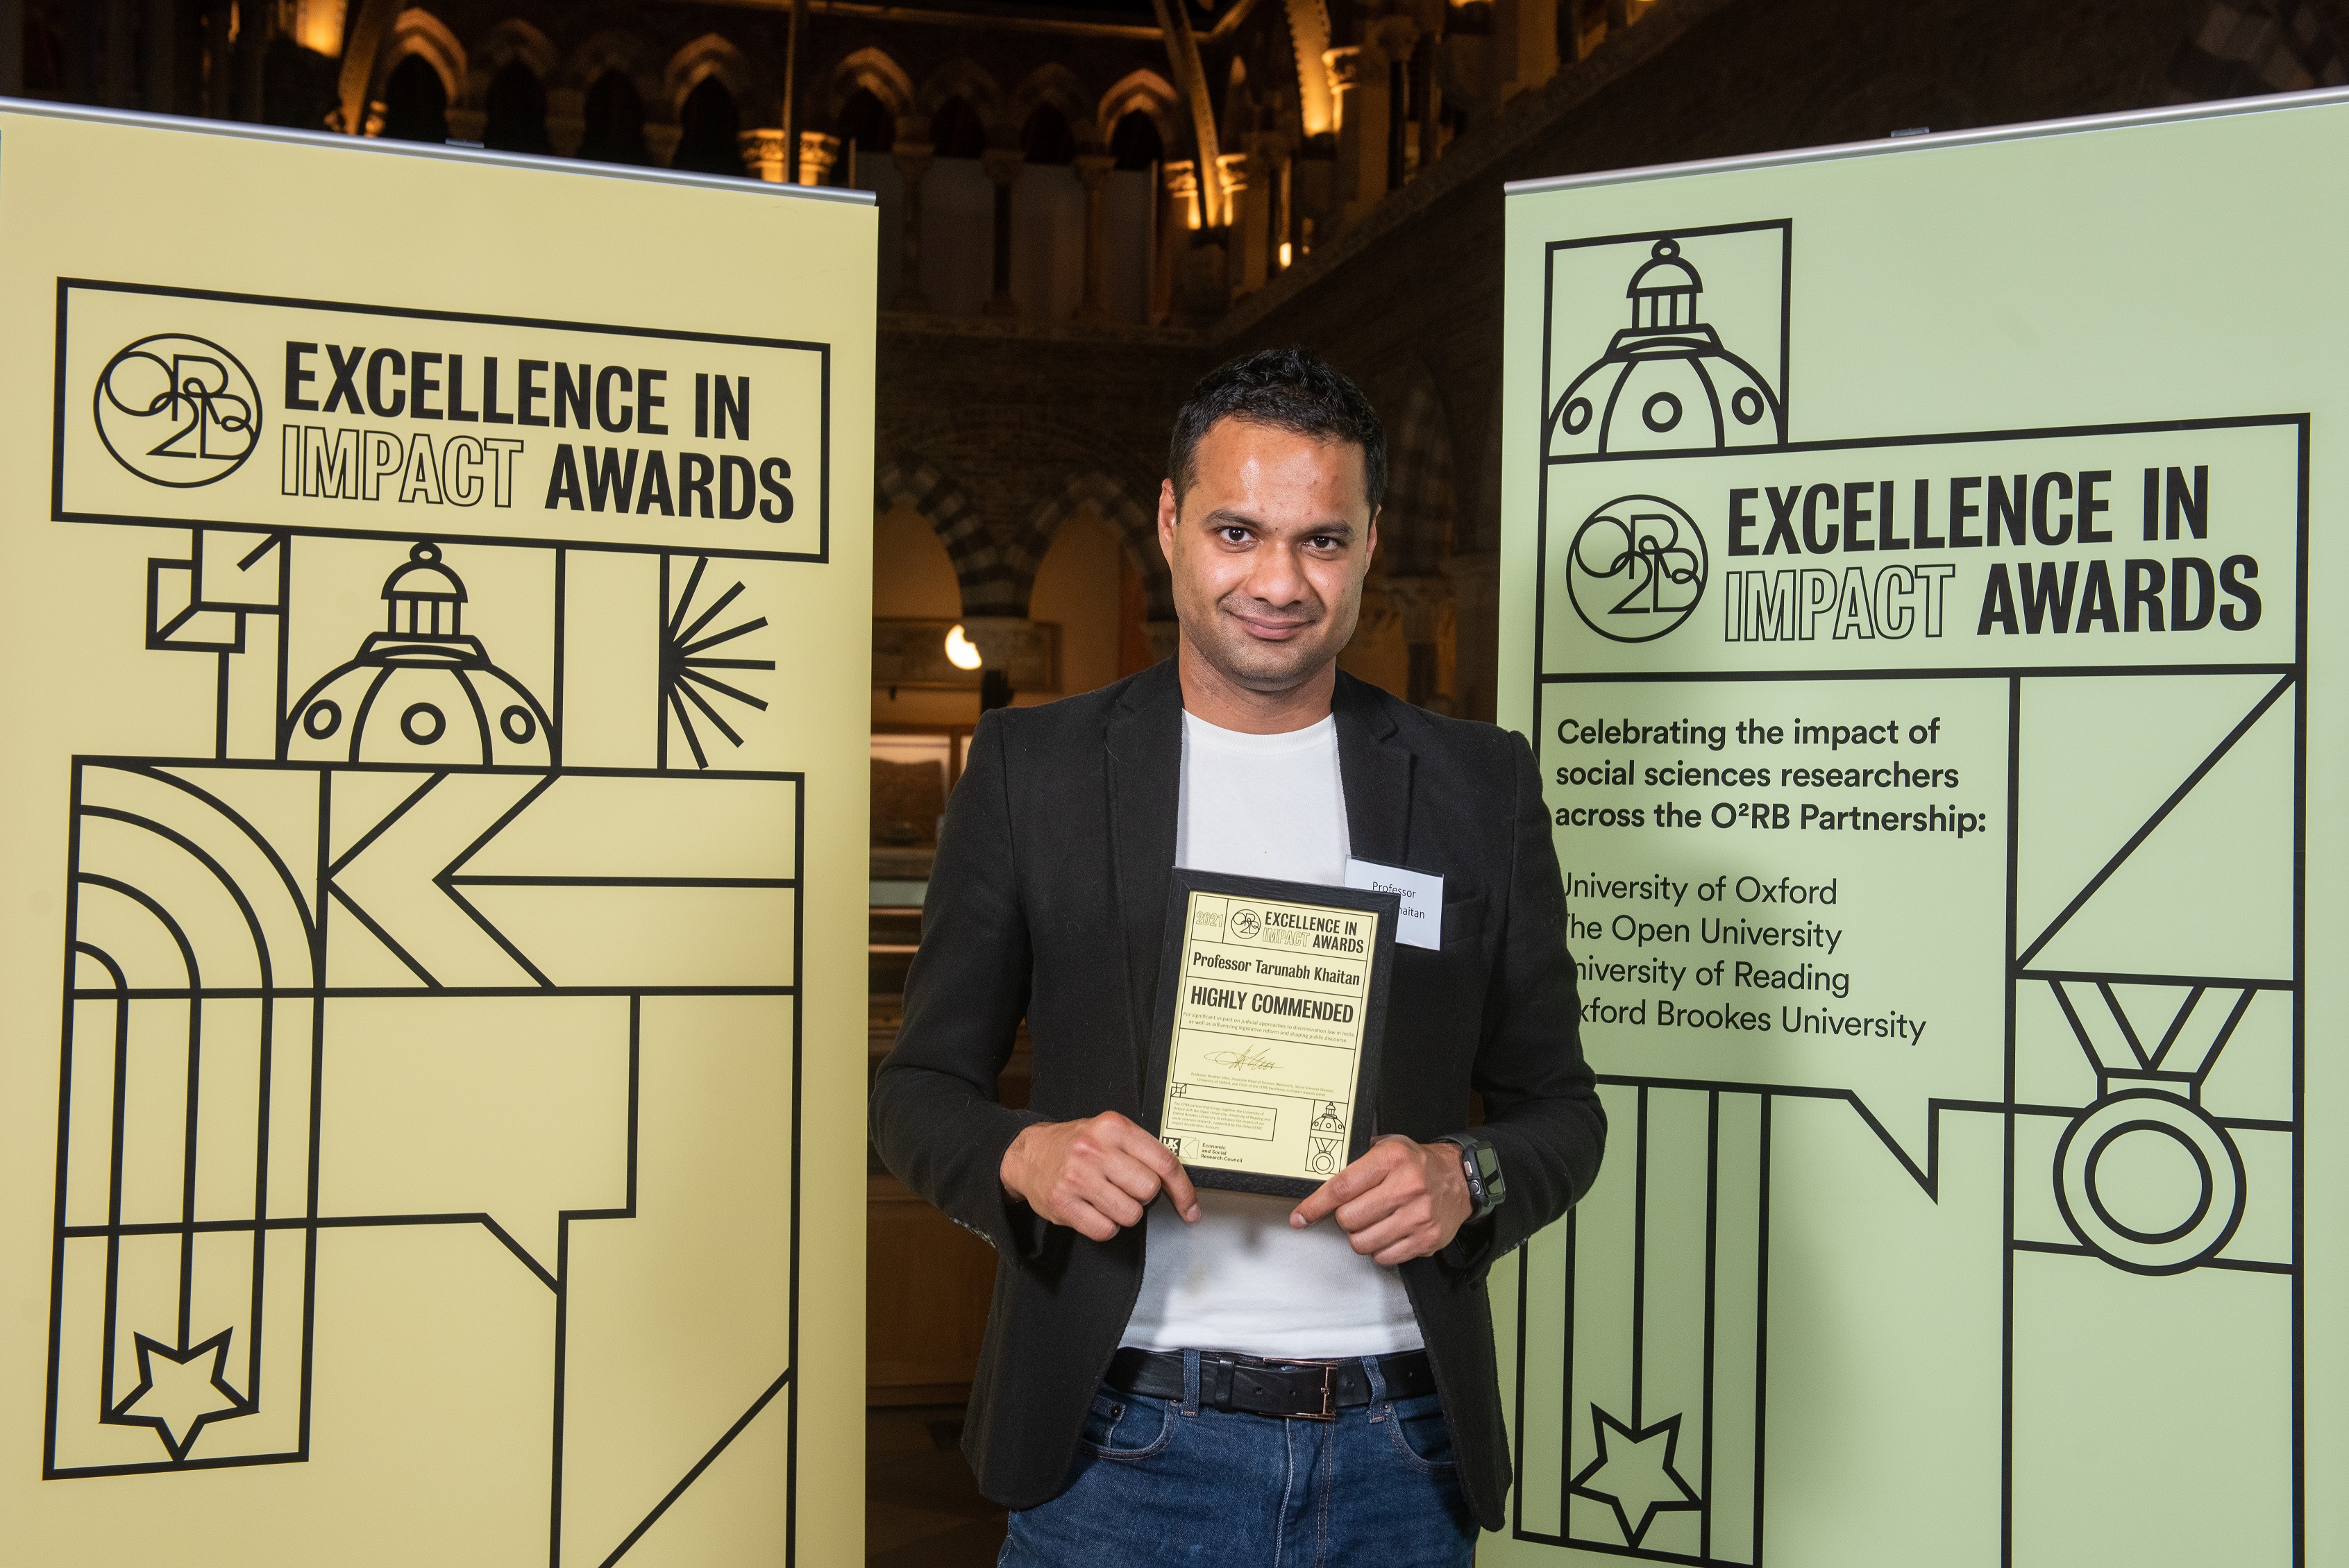 Professor Tarunabh Khaitan holds his Highly Commended impact award, flanked by event branding at the awards reception